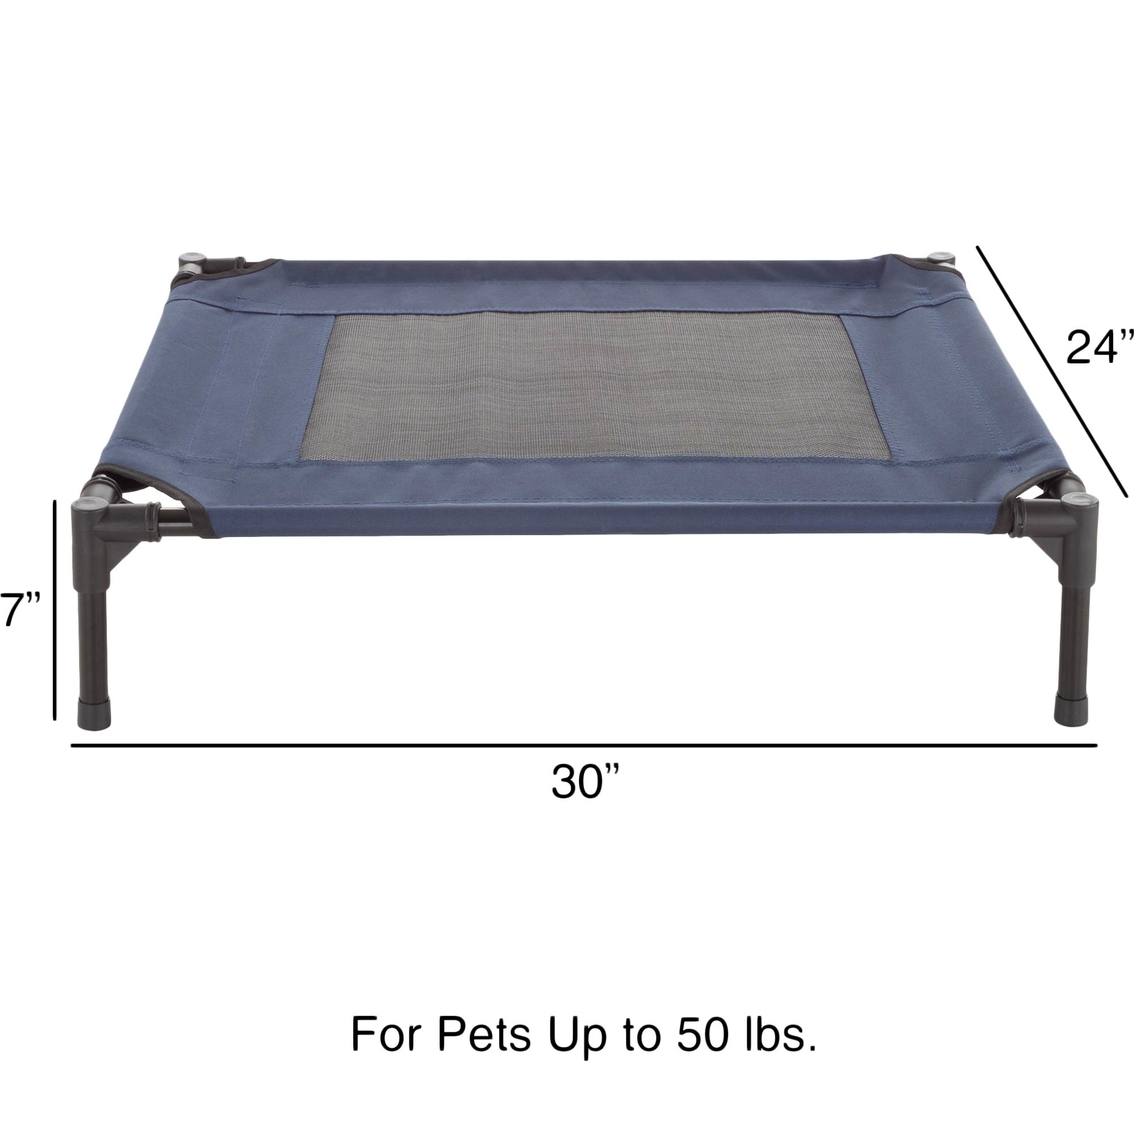 Petmaker Elevated Pet Bed with Mesh Center Panel - Image 3 of 8